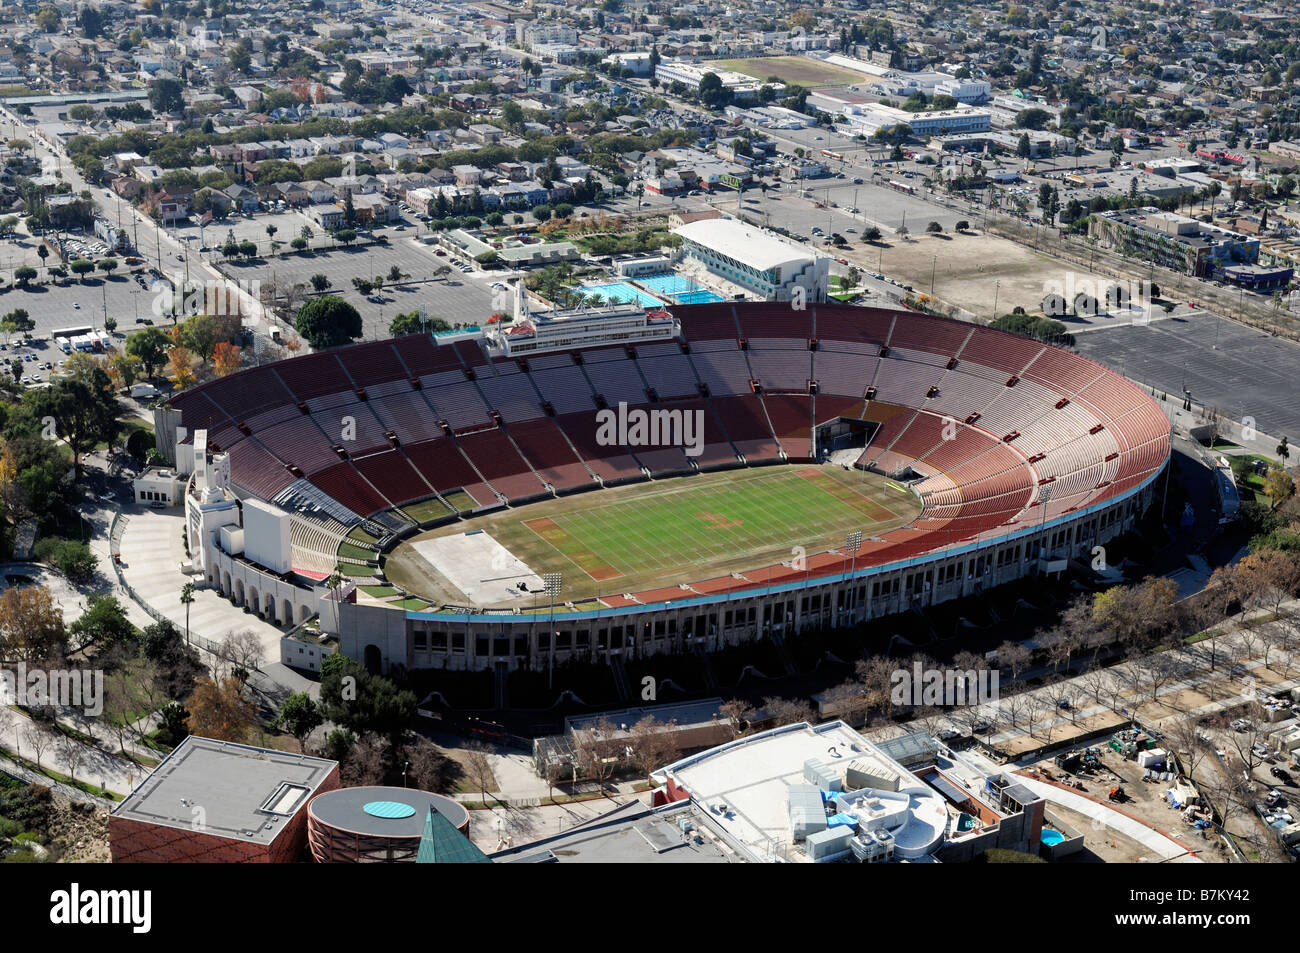 USC Trojans Football stadium The Coliseum Los Angeles California aerial view from a helicopter ride Stock Photo